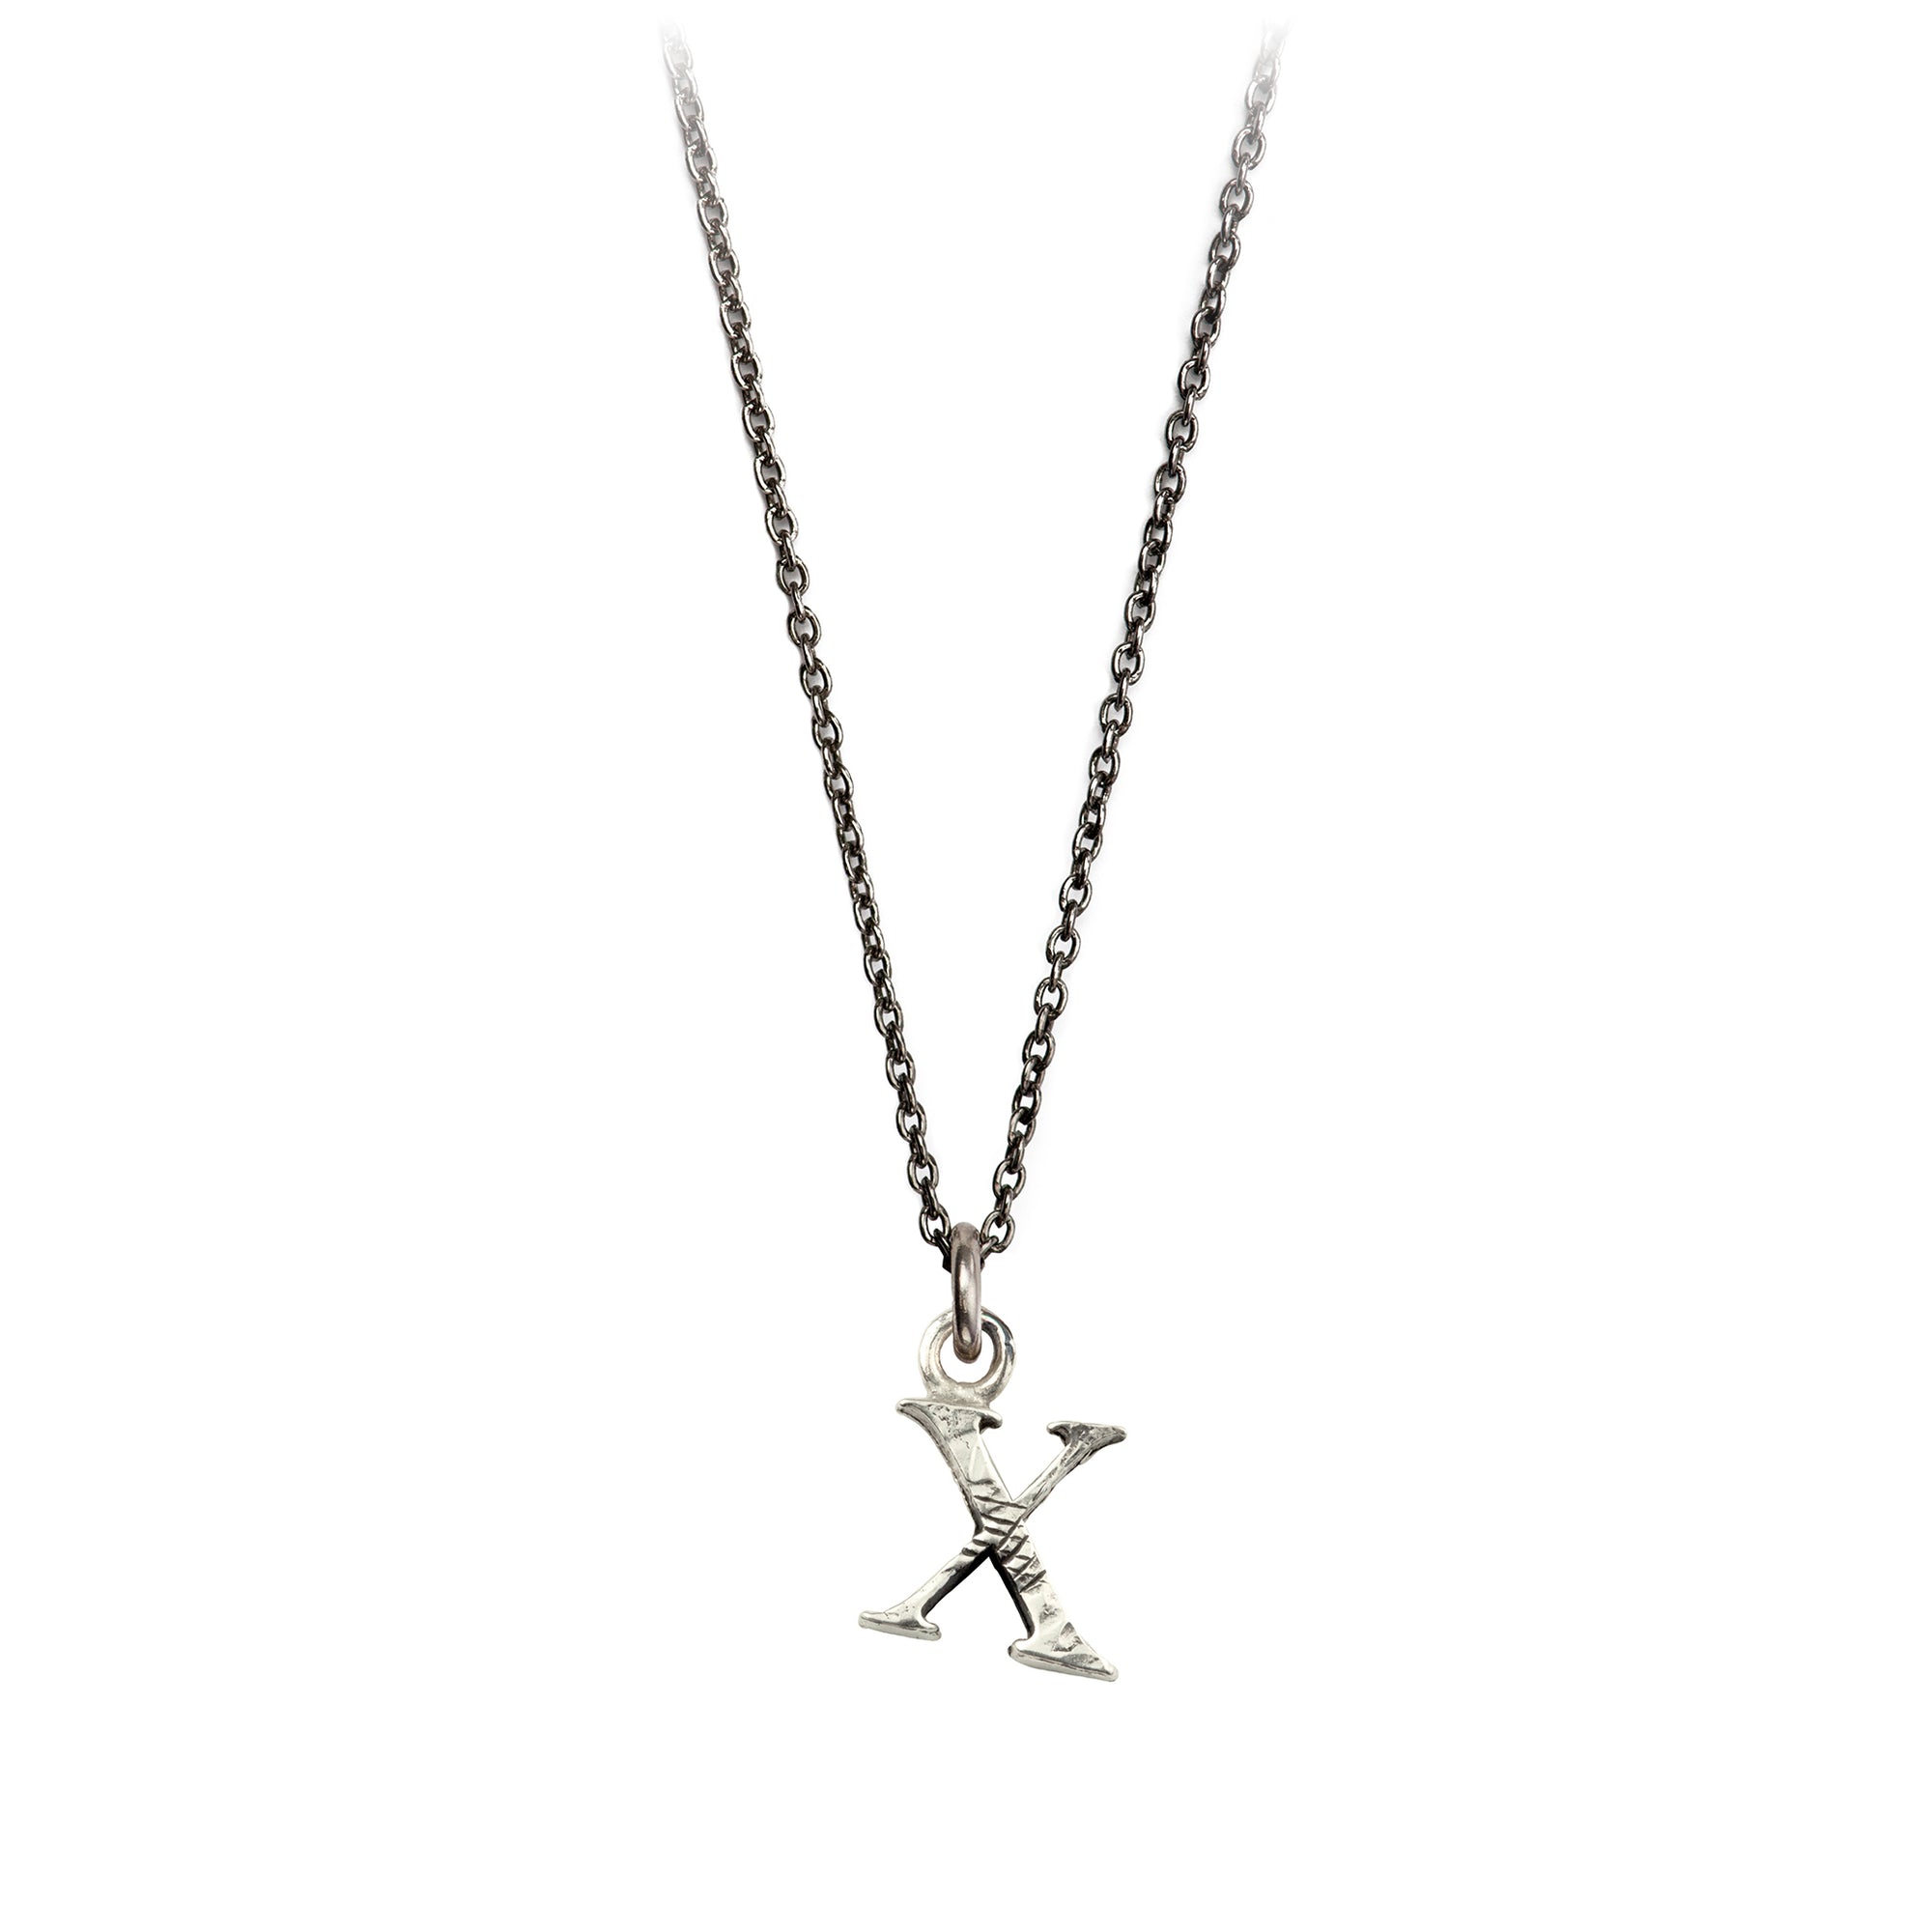 A sterling silver letter "X" charm on a silver chain.